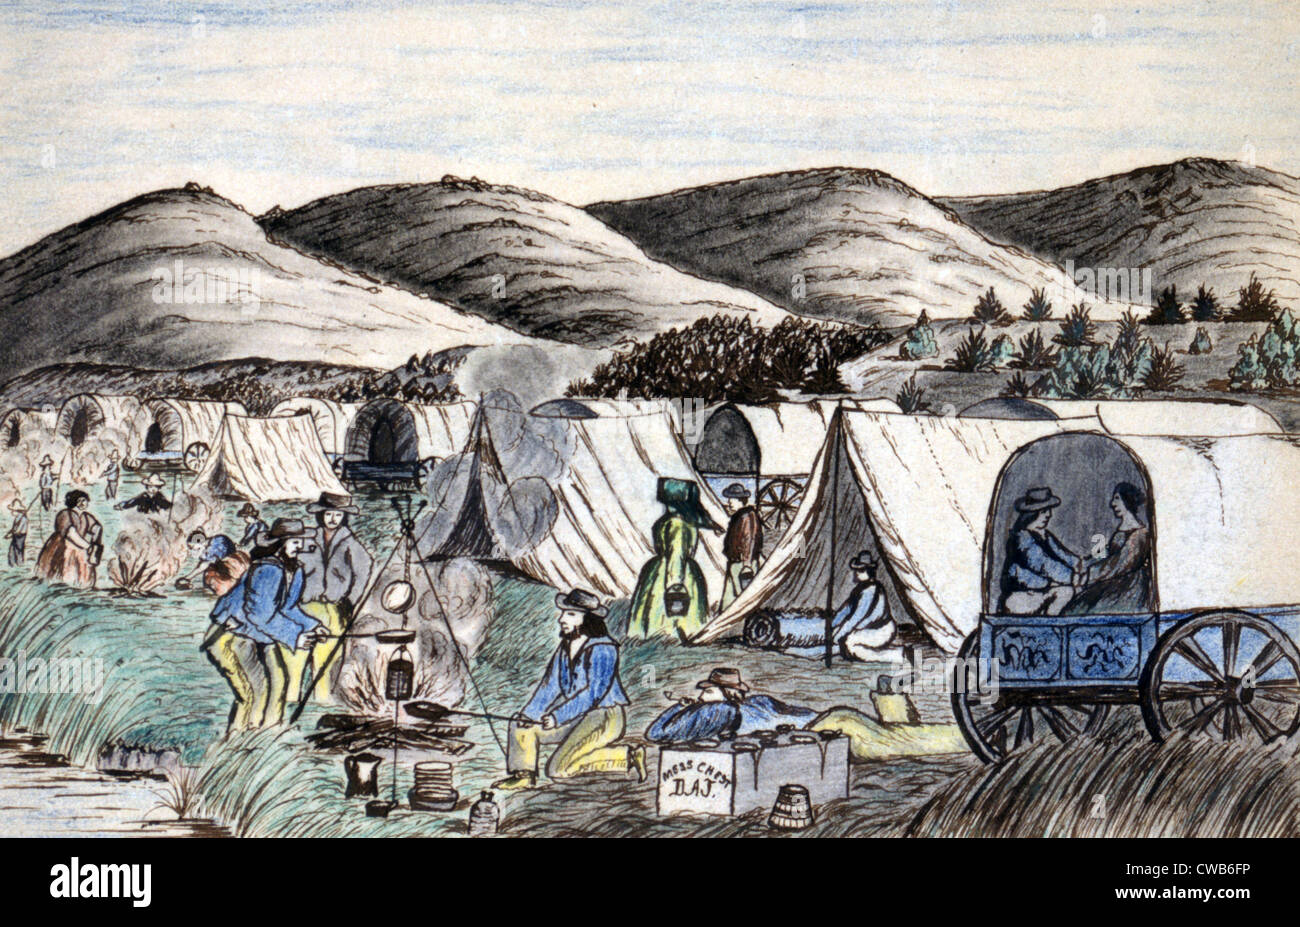 Wagon Train to the West. A wagon train of settlers camps on the Hymboldt River, Nevada Territory. Daniel Jenks, color drawing, Stock Photo